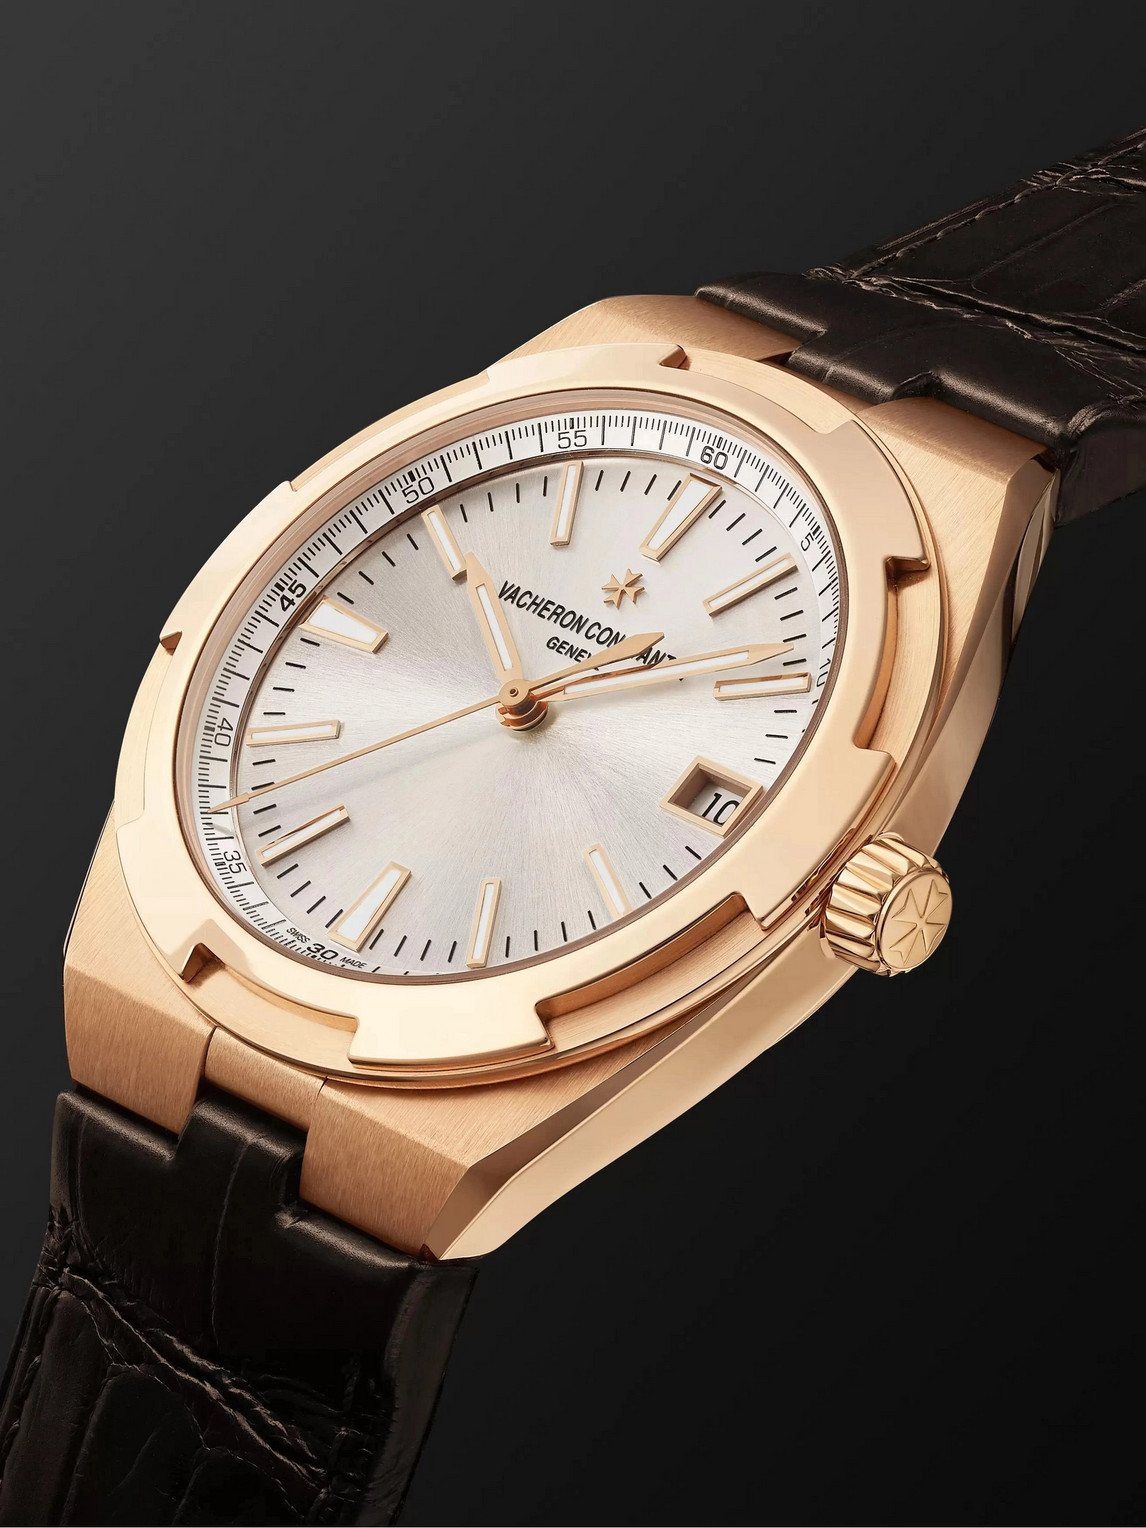 Shop Vacheron Constantin Overseas Automatic 41mm 18-karat Pink Gold And Leather Watch, Ref. No. 4500v/000r-b127